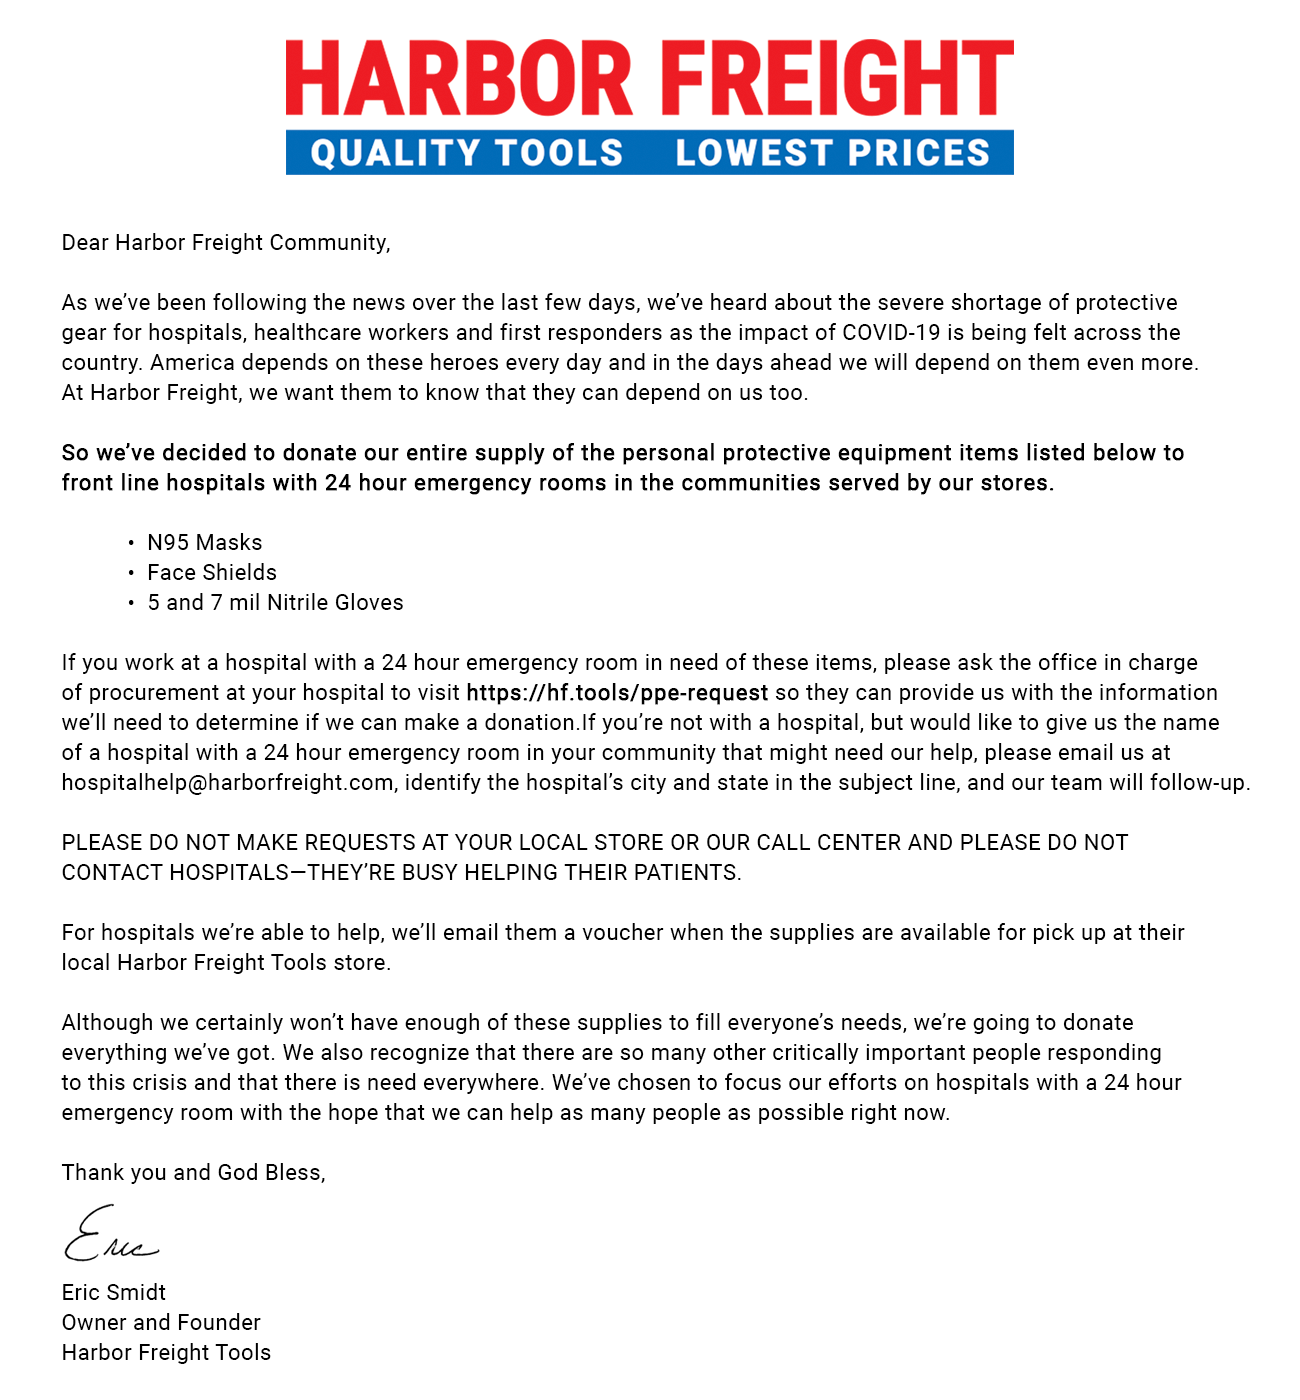 Letter from Harbor Freight